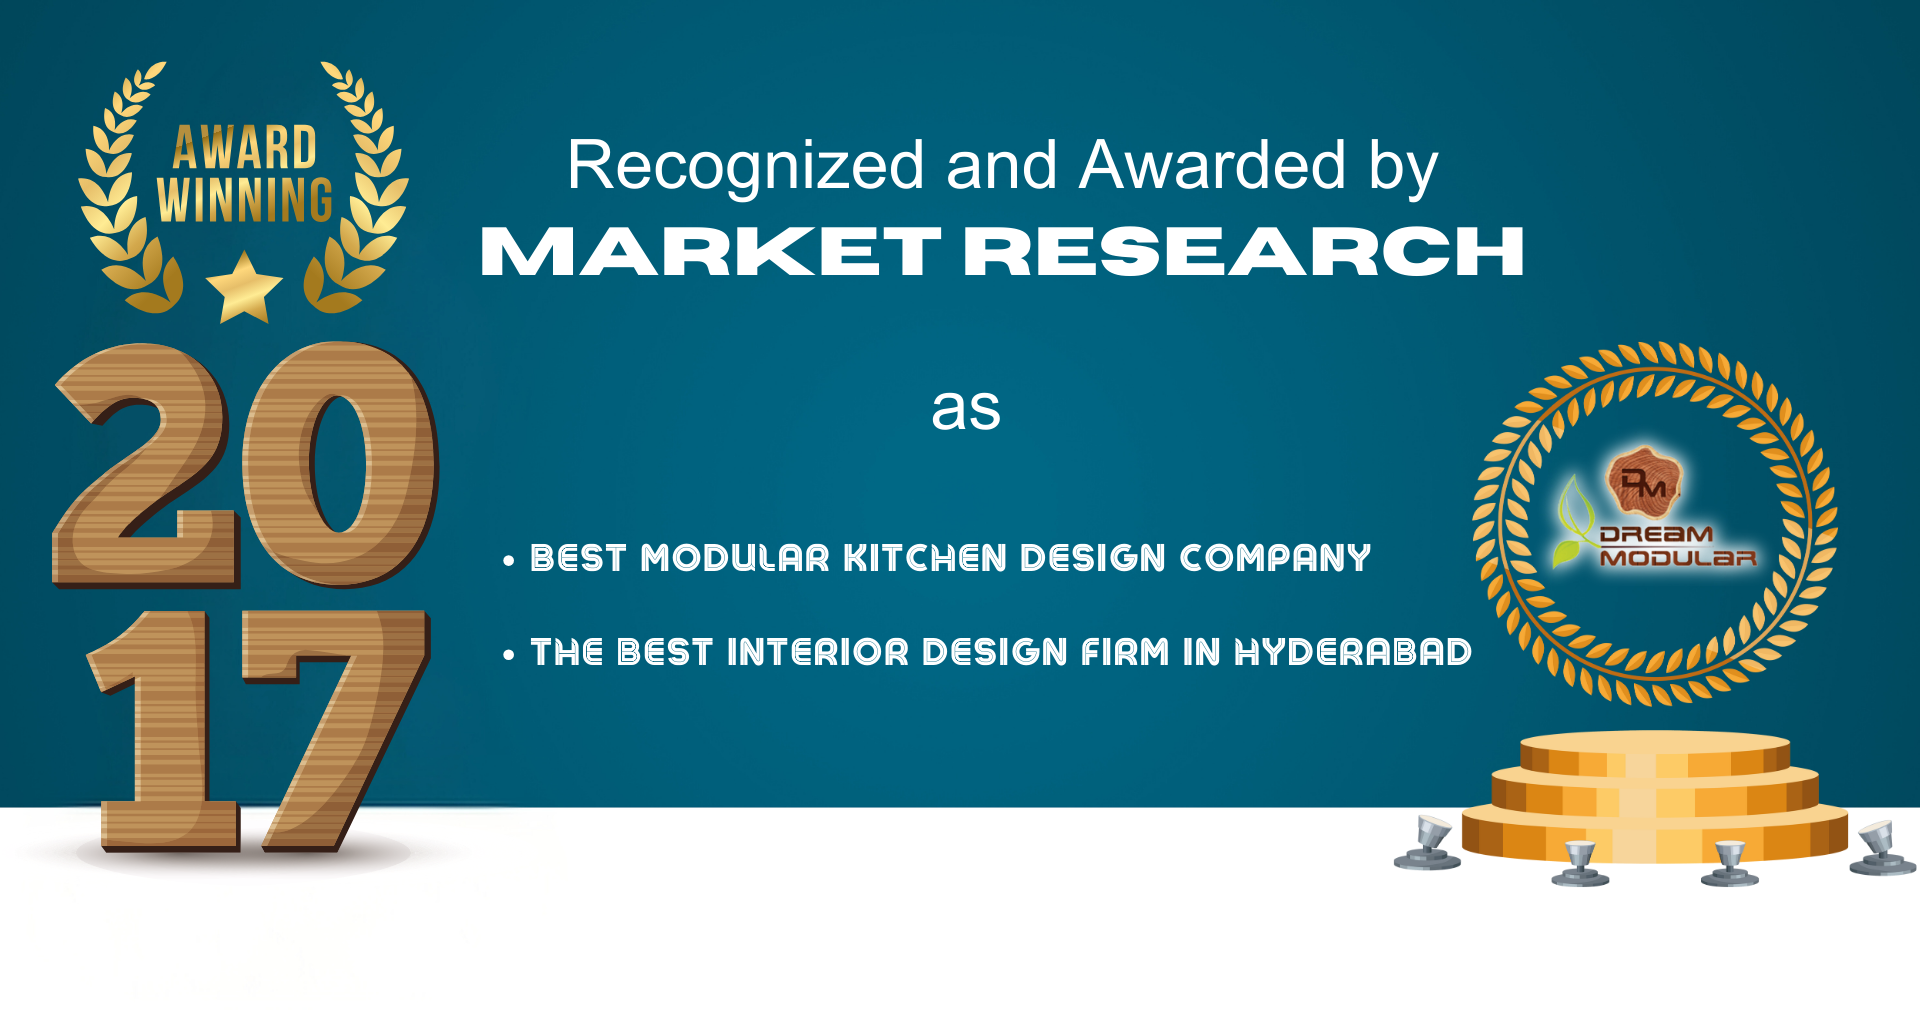 We were recognized as the best Modular Kitchen design company and the best Interior Design firm in Hyderabad by Market Research Award, and featured by Three Best Rated for the same. - 2017